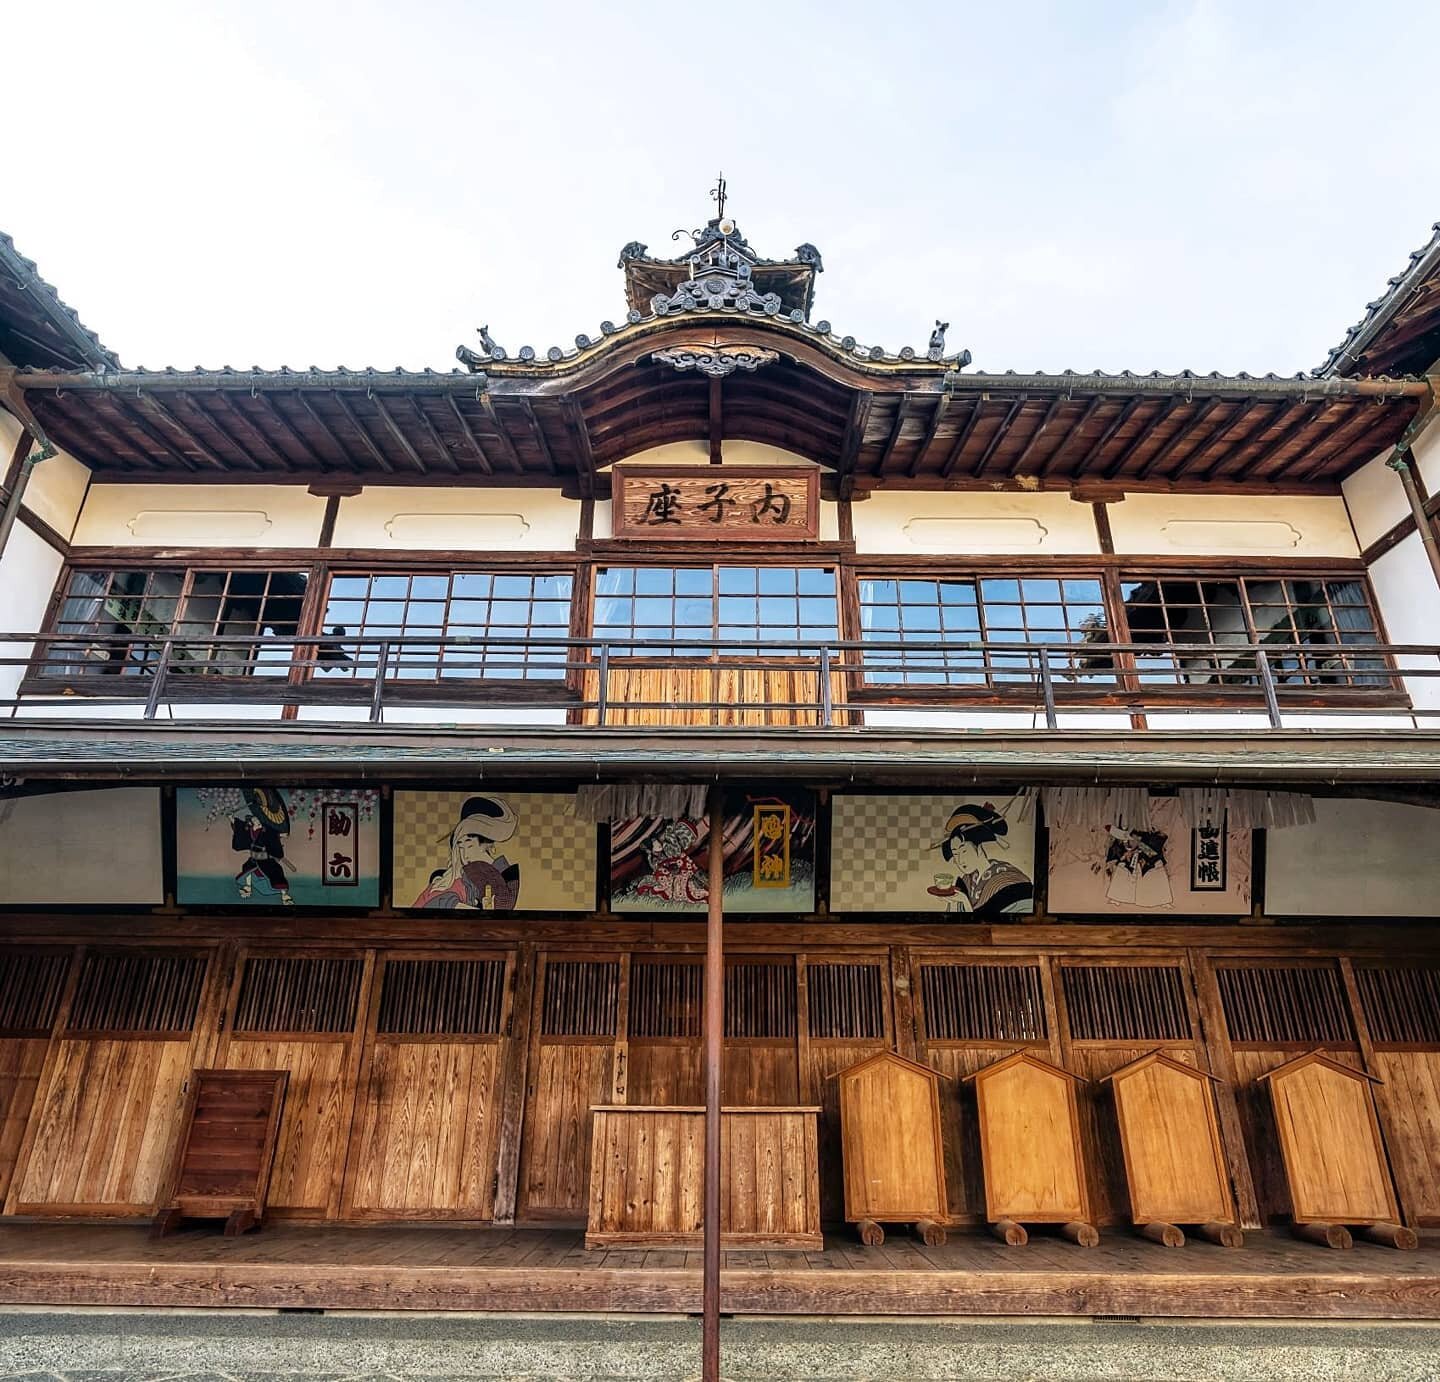 The magnificent Uchiko-za Theater was originally constructed in 1916, and fully restored to its original glory days in 1985. It is one of 20 traditional theaters in Japan, but only one of a handful that still holds performances. ⁣
⁣
Catch an original